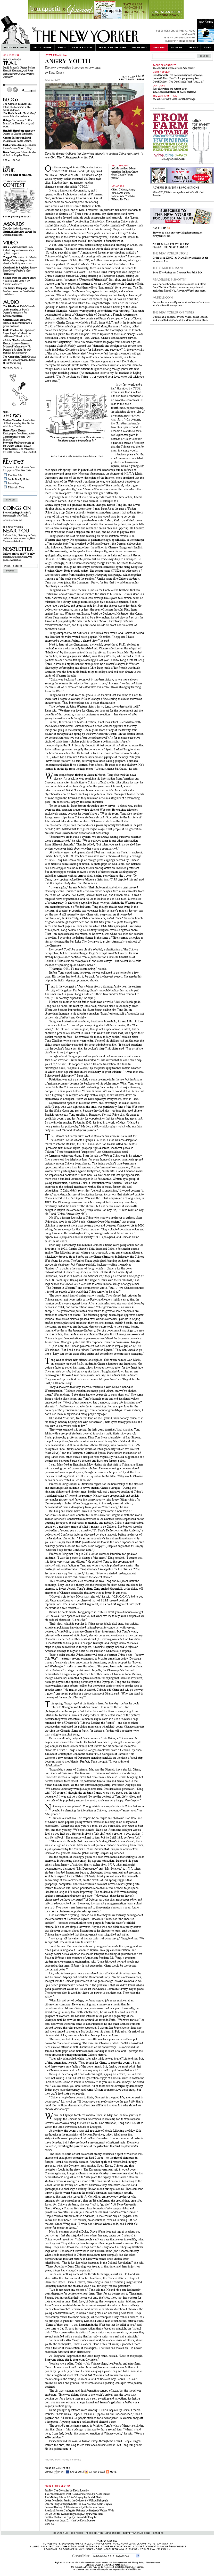 Letter from China- Angry Youth- Reporting & Essays- The New Yorker.png